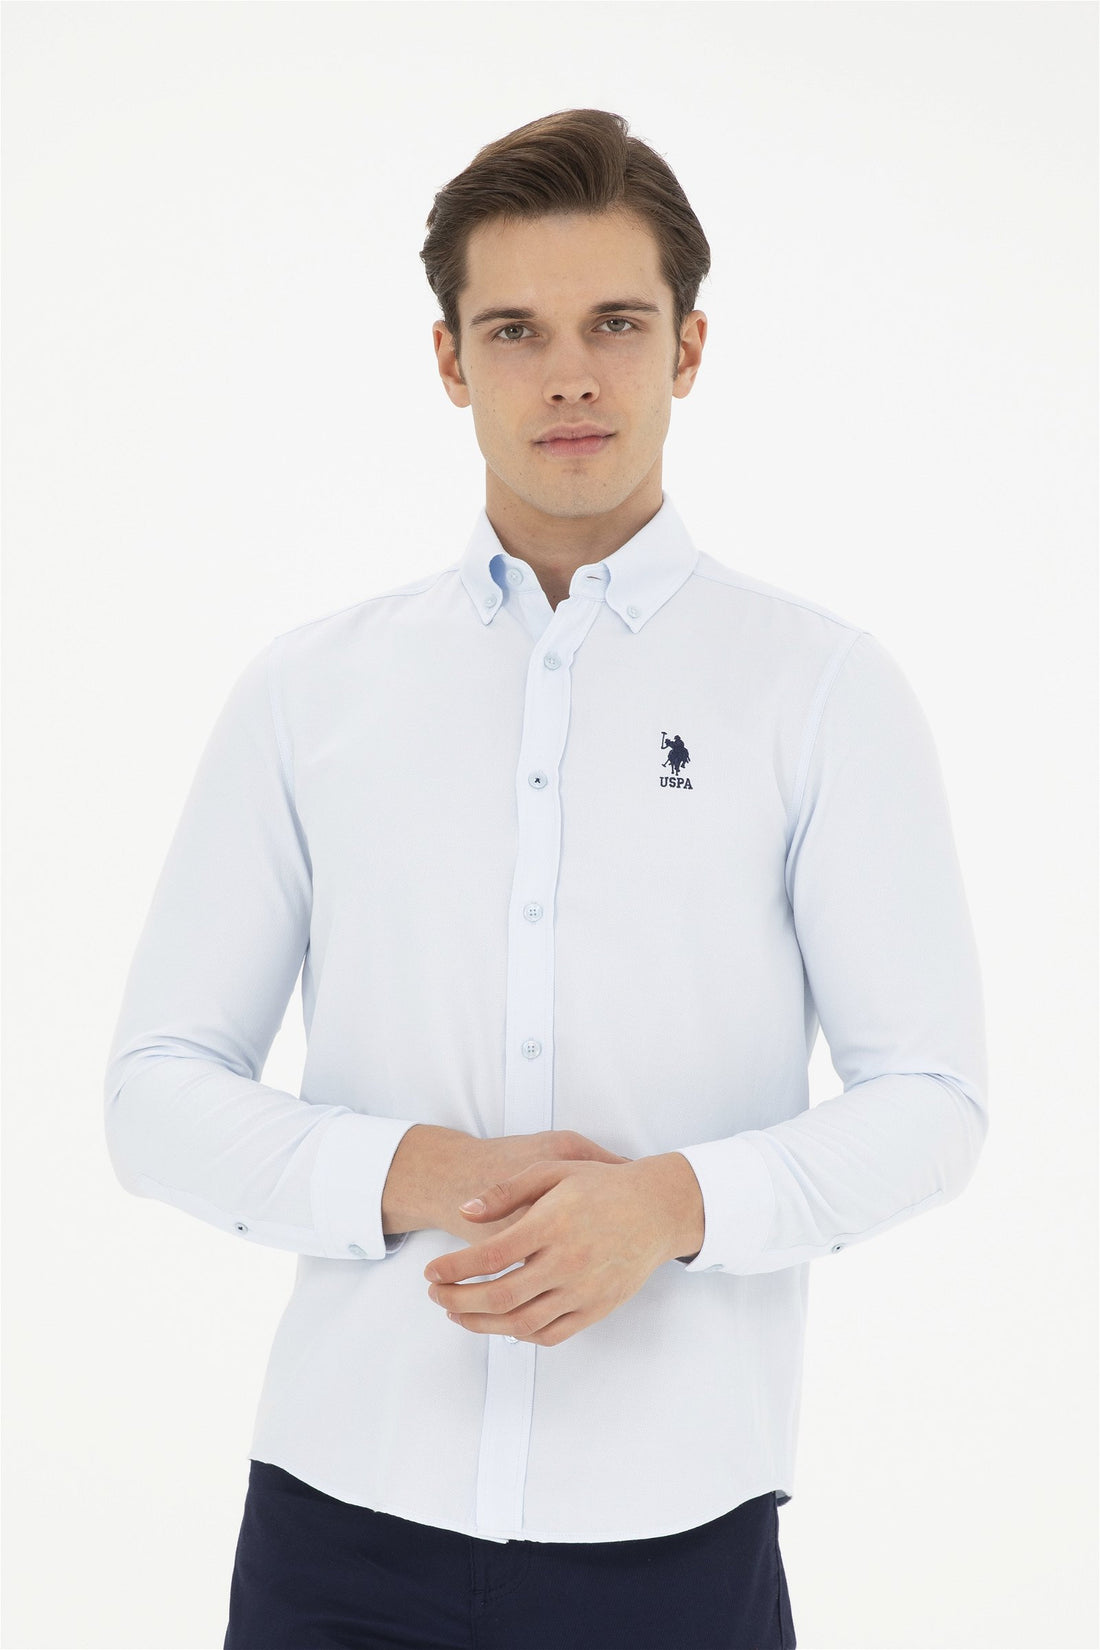 Button Down Shirt With Logo_G081GL0040 1886621_VR003_01